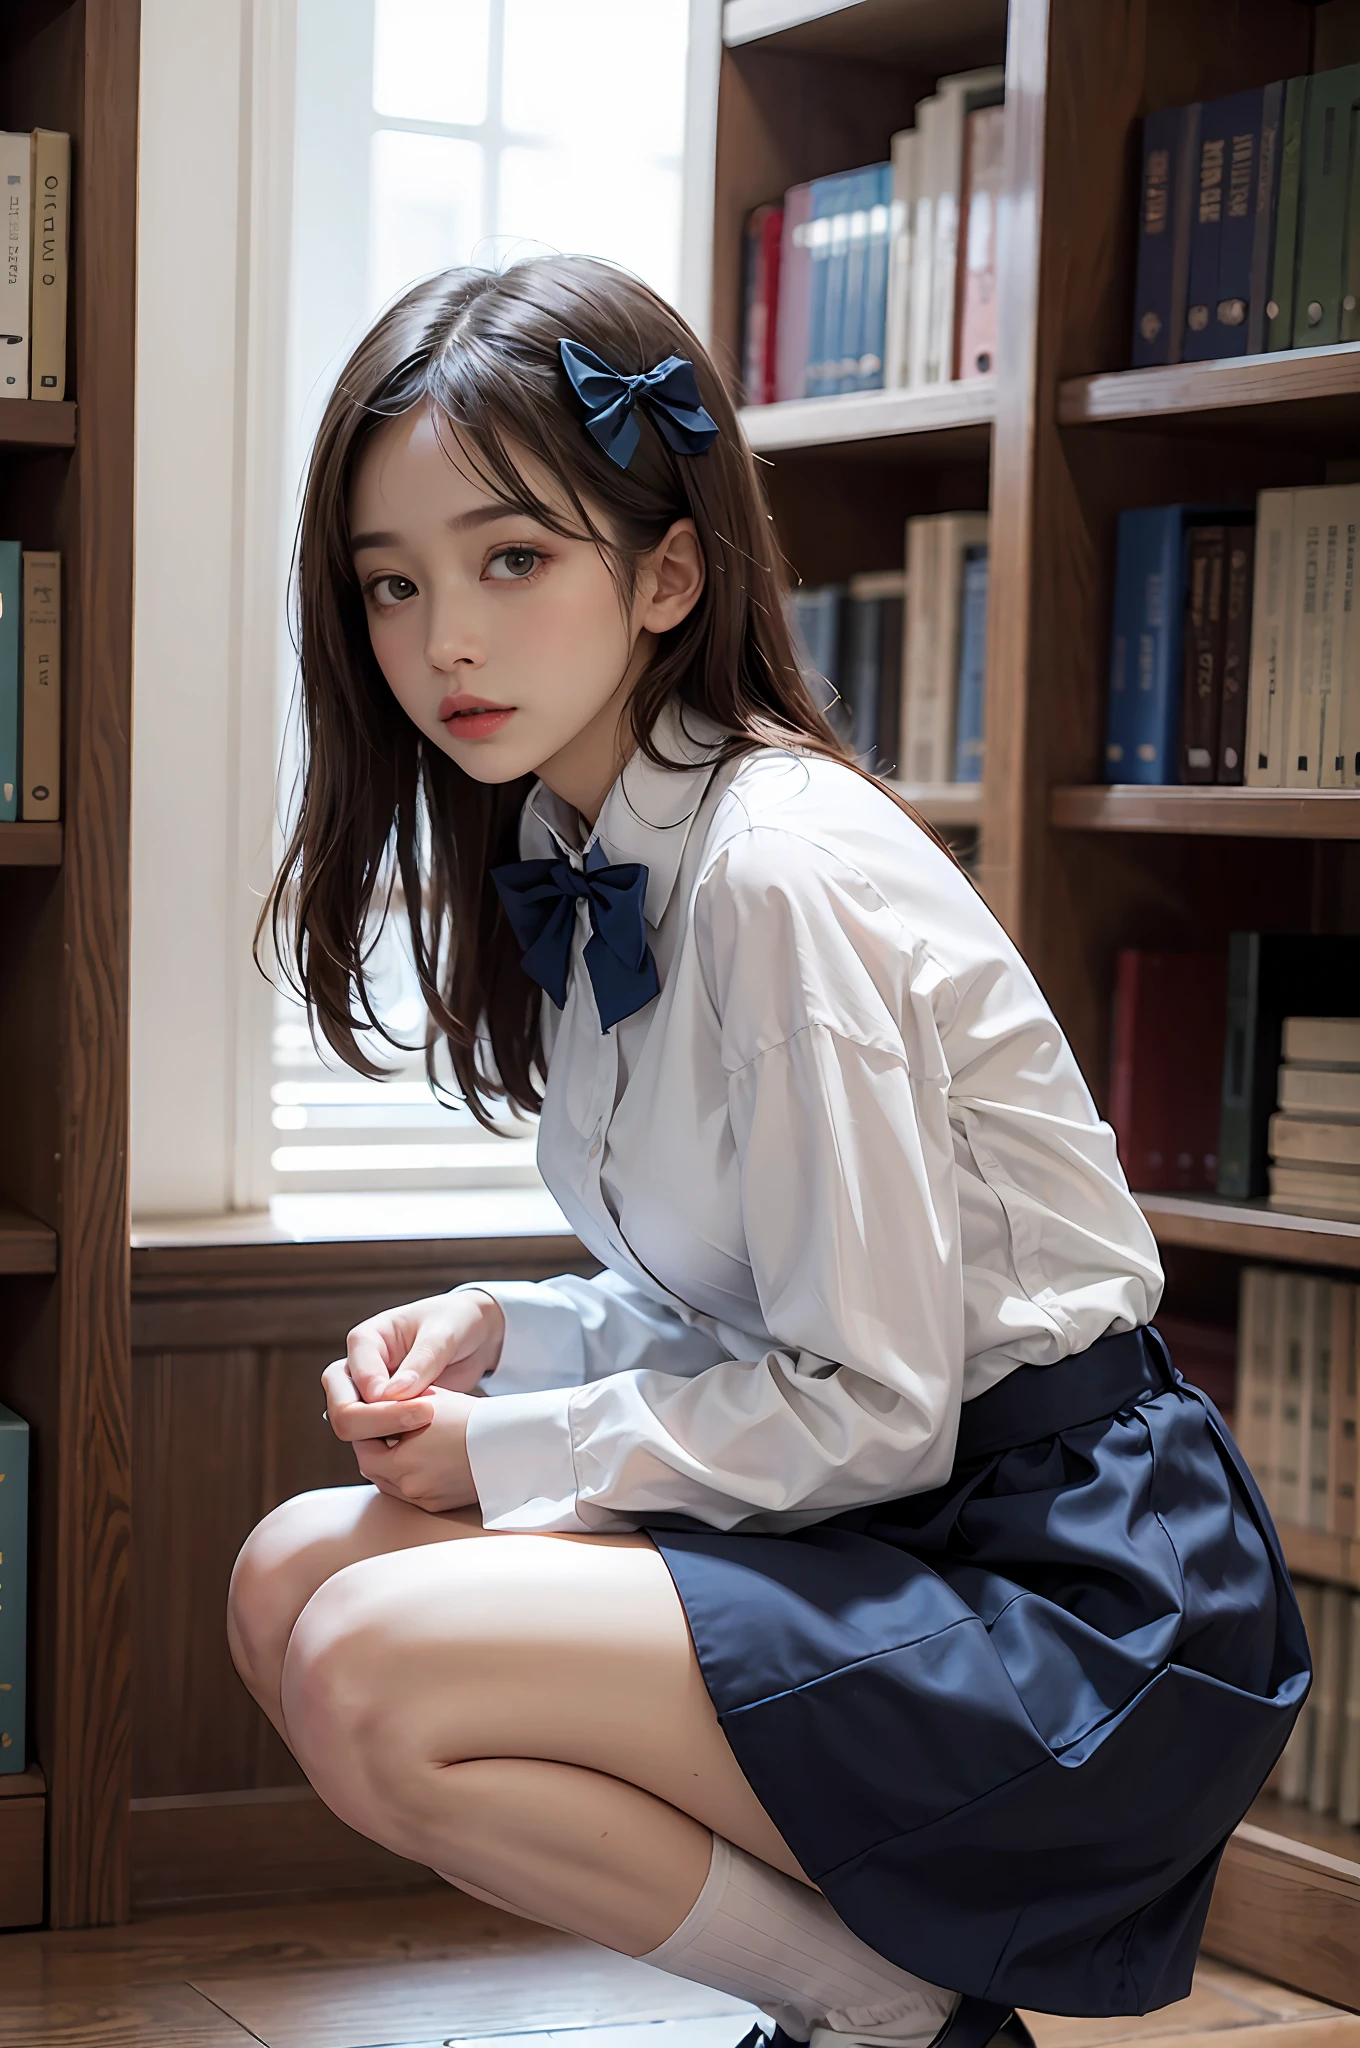 Woman squatting alone in library、White floral blouse、Dark blue bow tie、Dark blue skirt with ruffles,、Wearing white silk socks、Wearing pumps、White light background